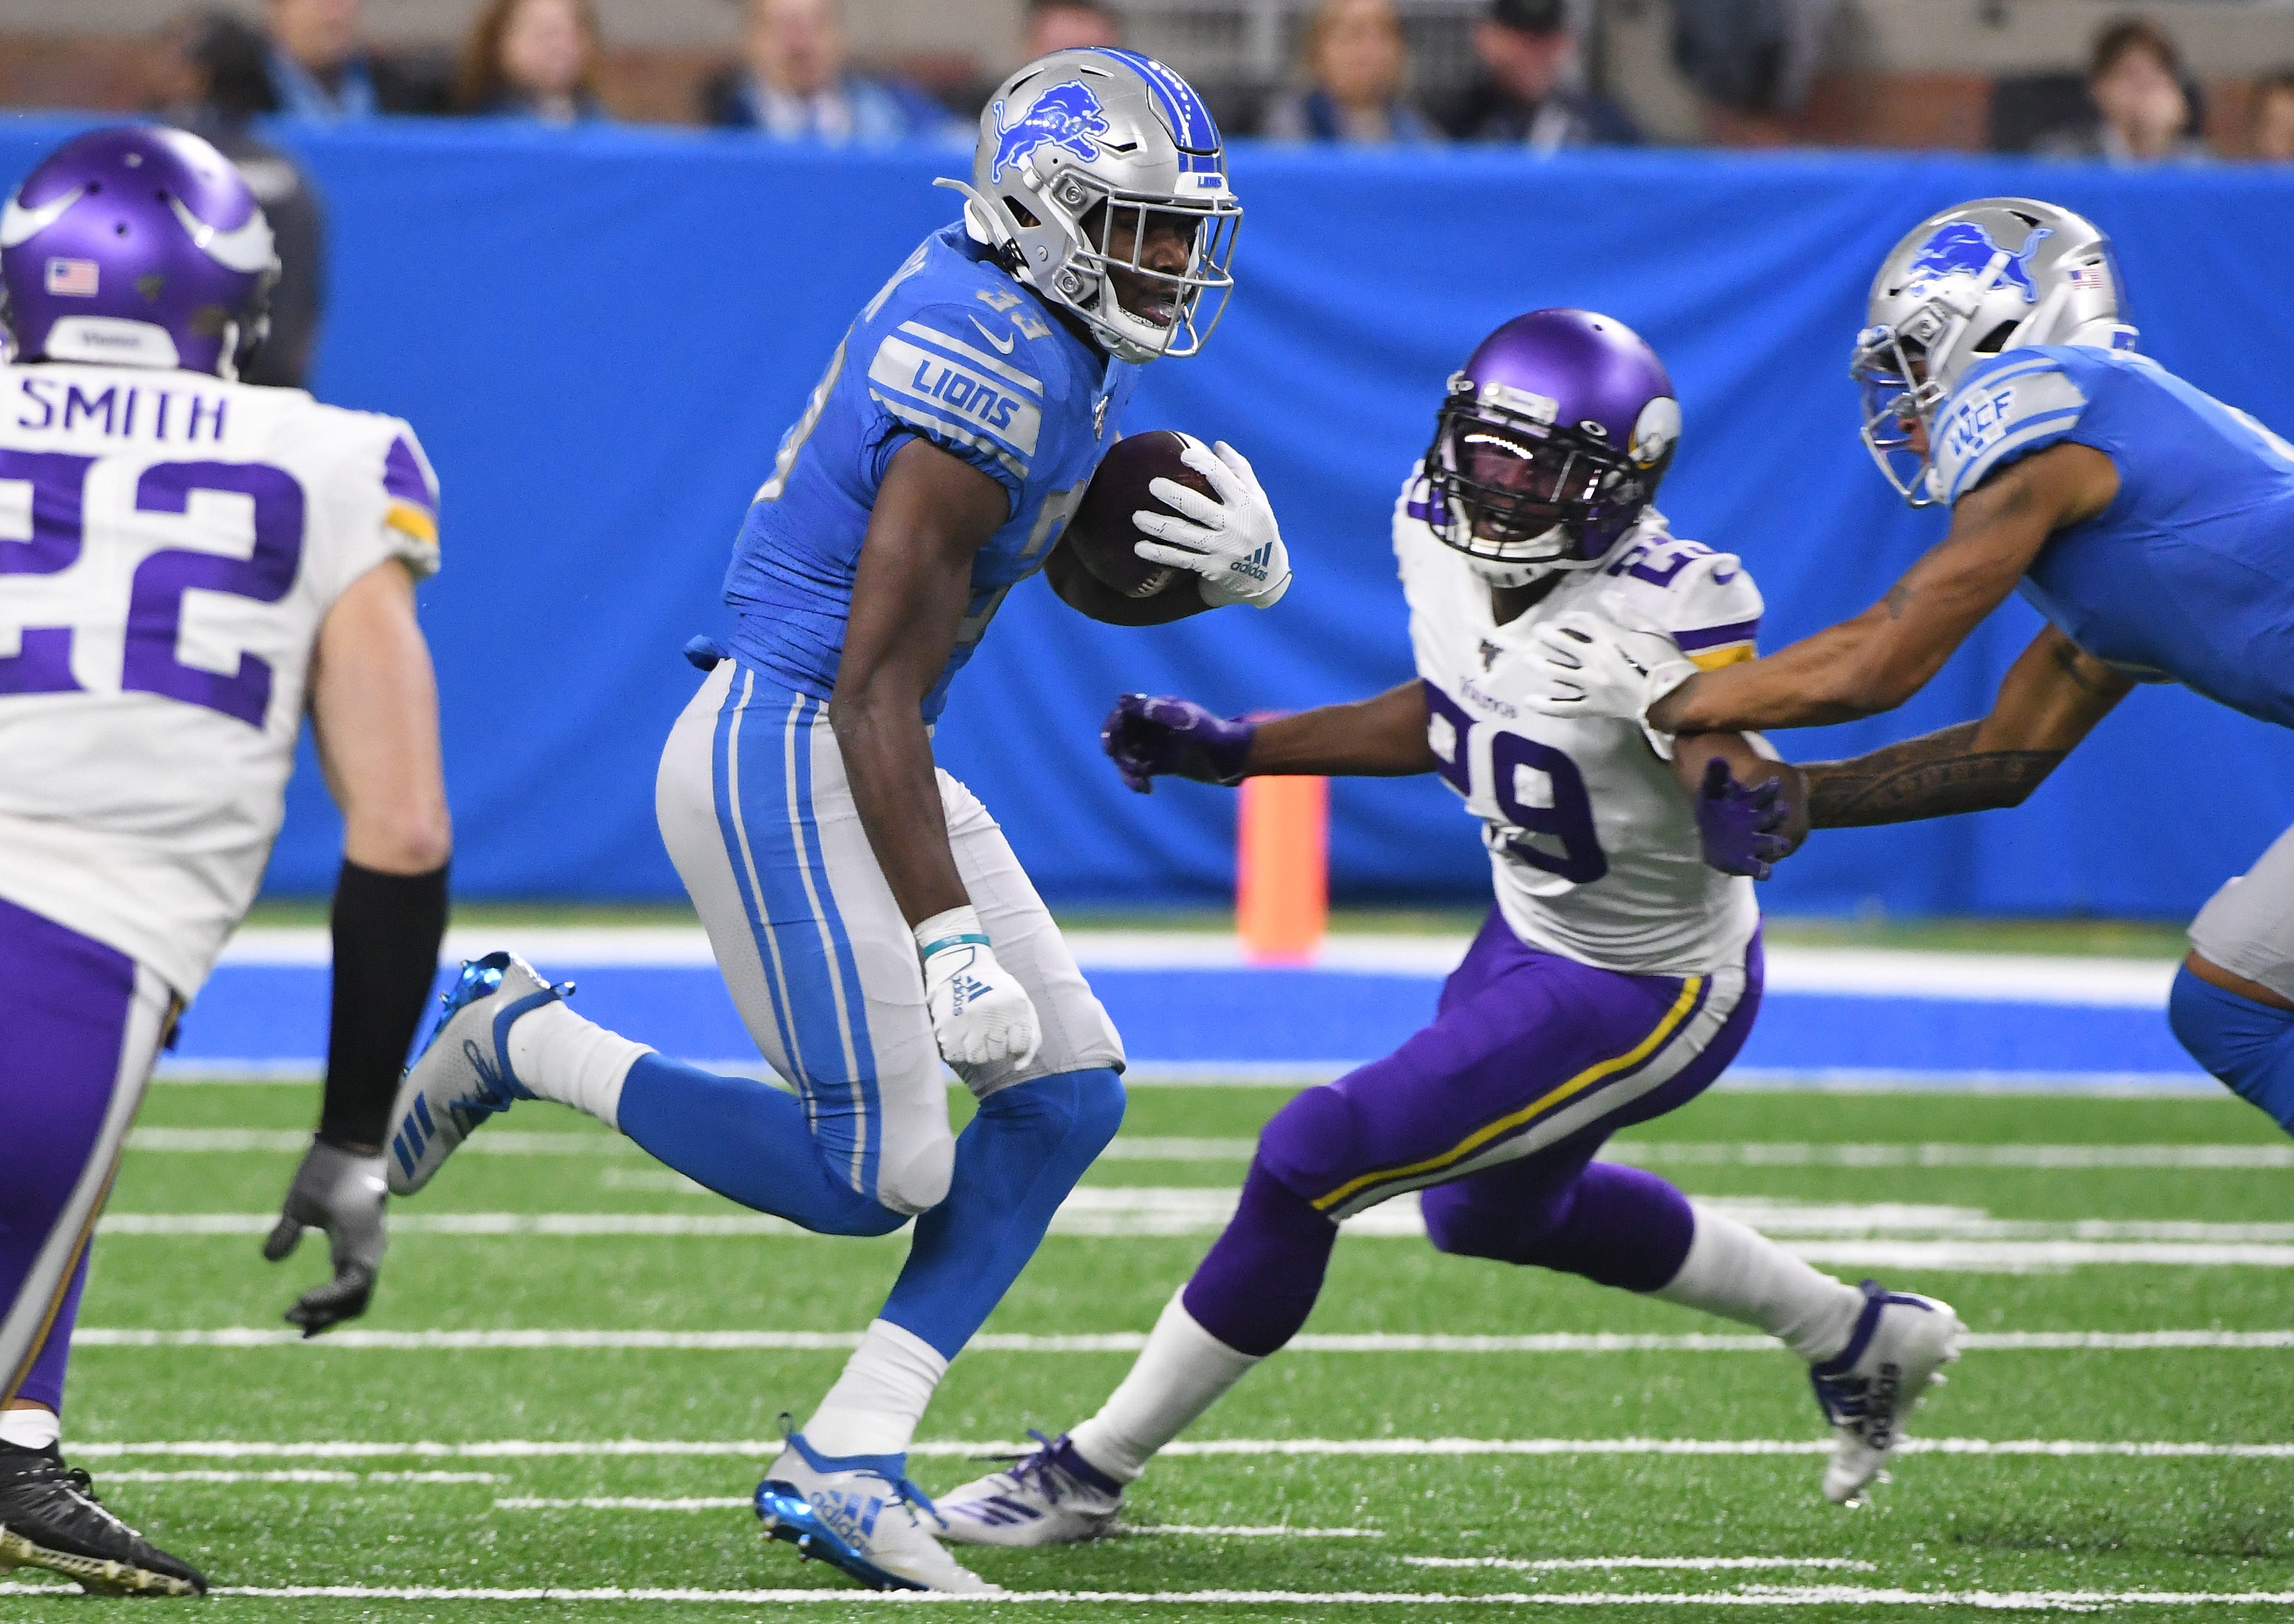 Lions running back Kerryon Johnson heads upfield in the first quarter. Johnson would later get hurt with running back Ty Johnson picking up the slack.